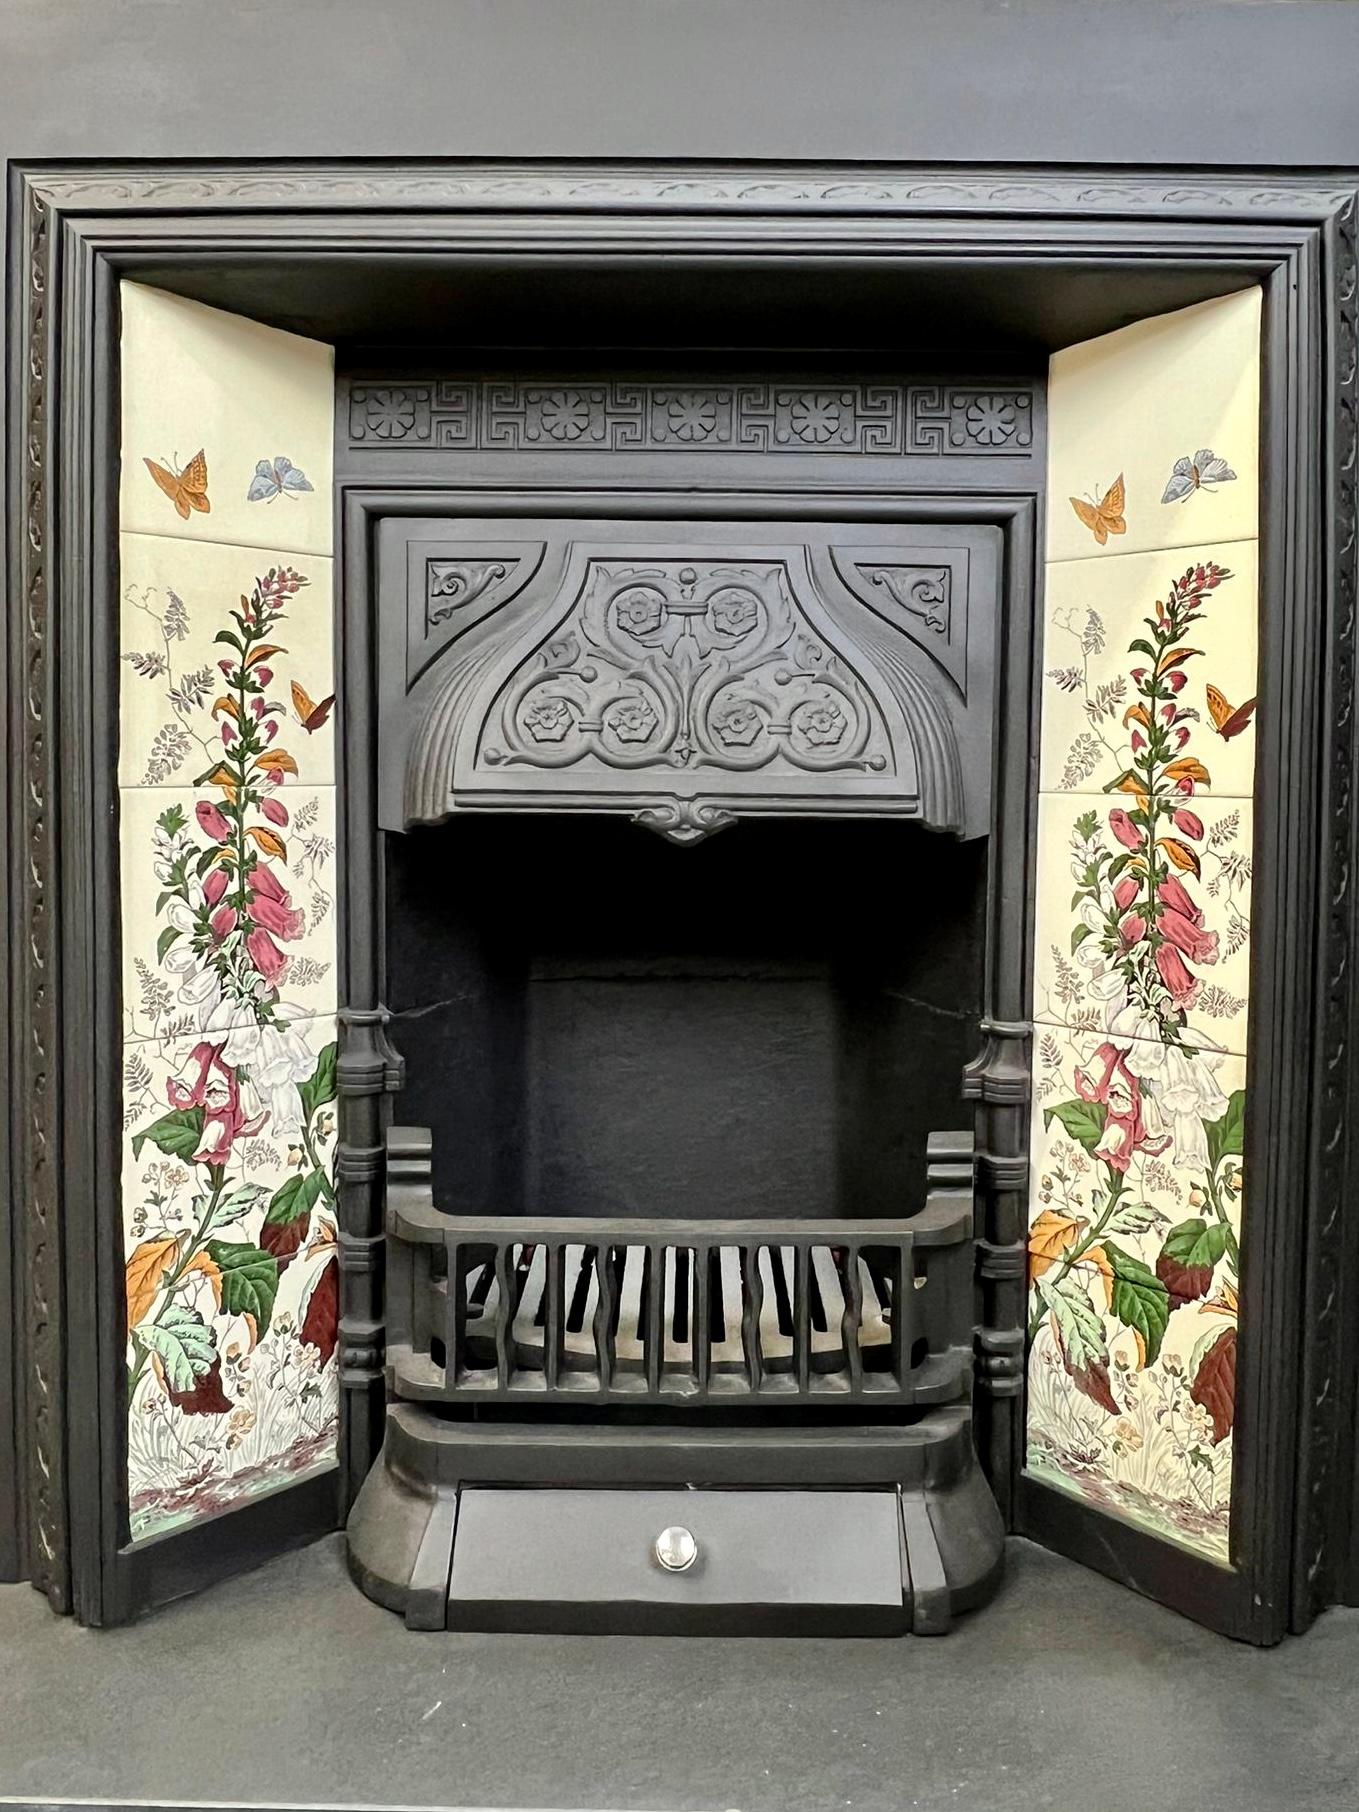 19th Century Cast Iron Tiled Fireplace Insert.
Great Example Of A Fine English Victorian Antque Fireplace.
English Made Circa 1880 With Classical Victorian Floral & Petal Detailing. 
Complete With Fireback, Canopy Hood And Firegrate. 
Included Is